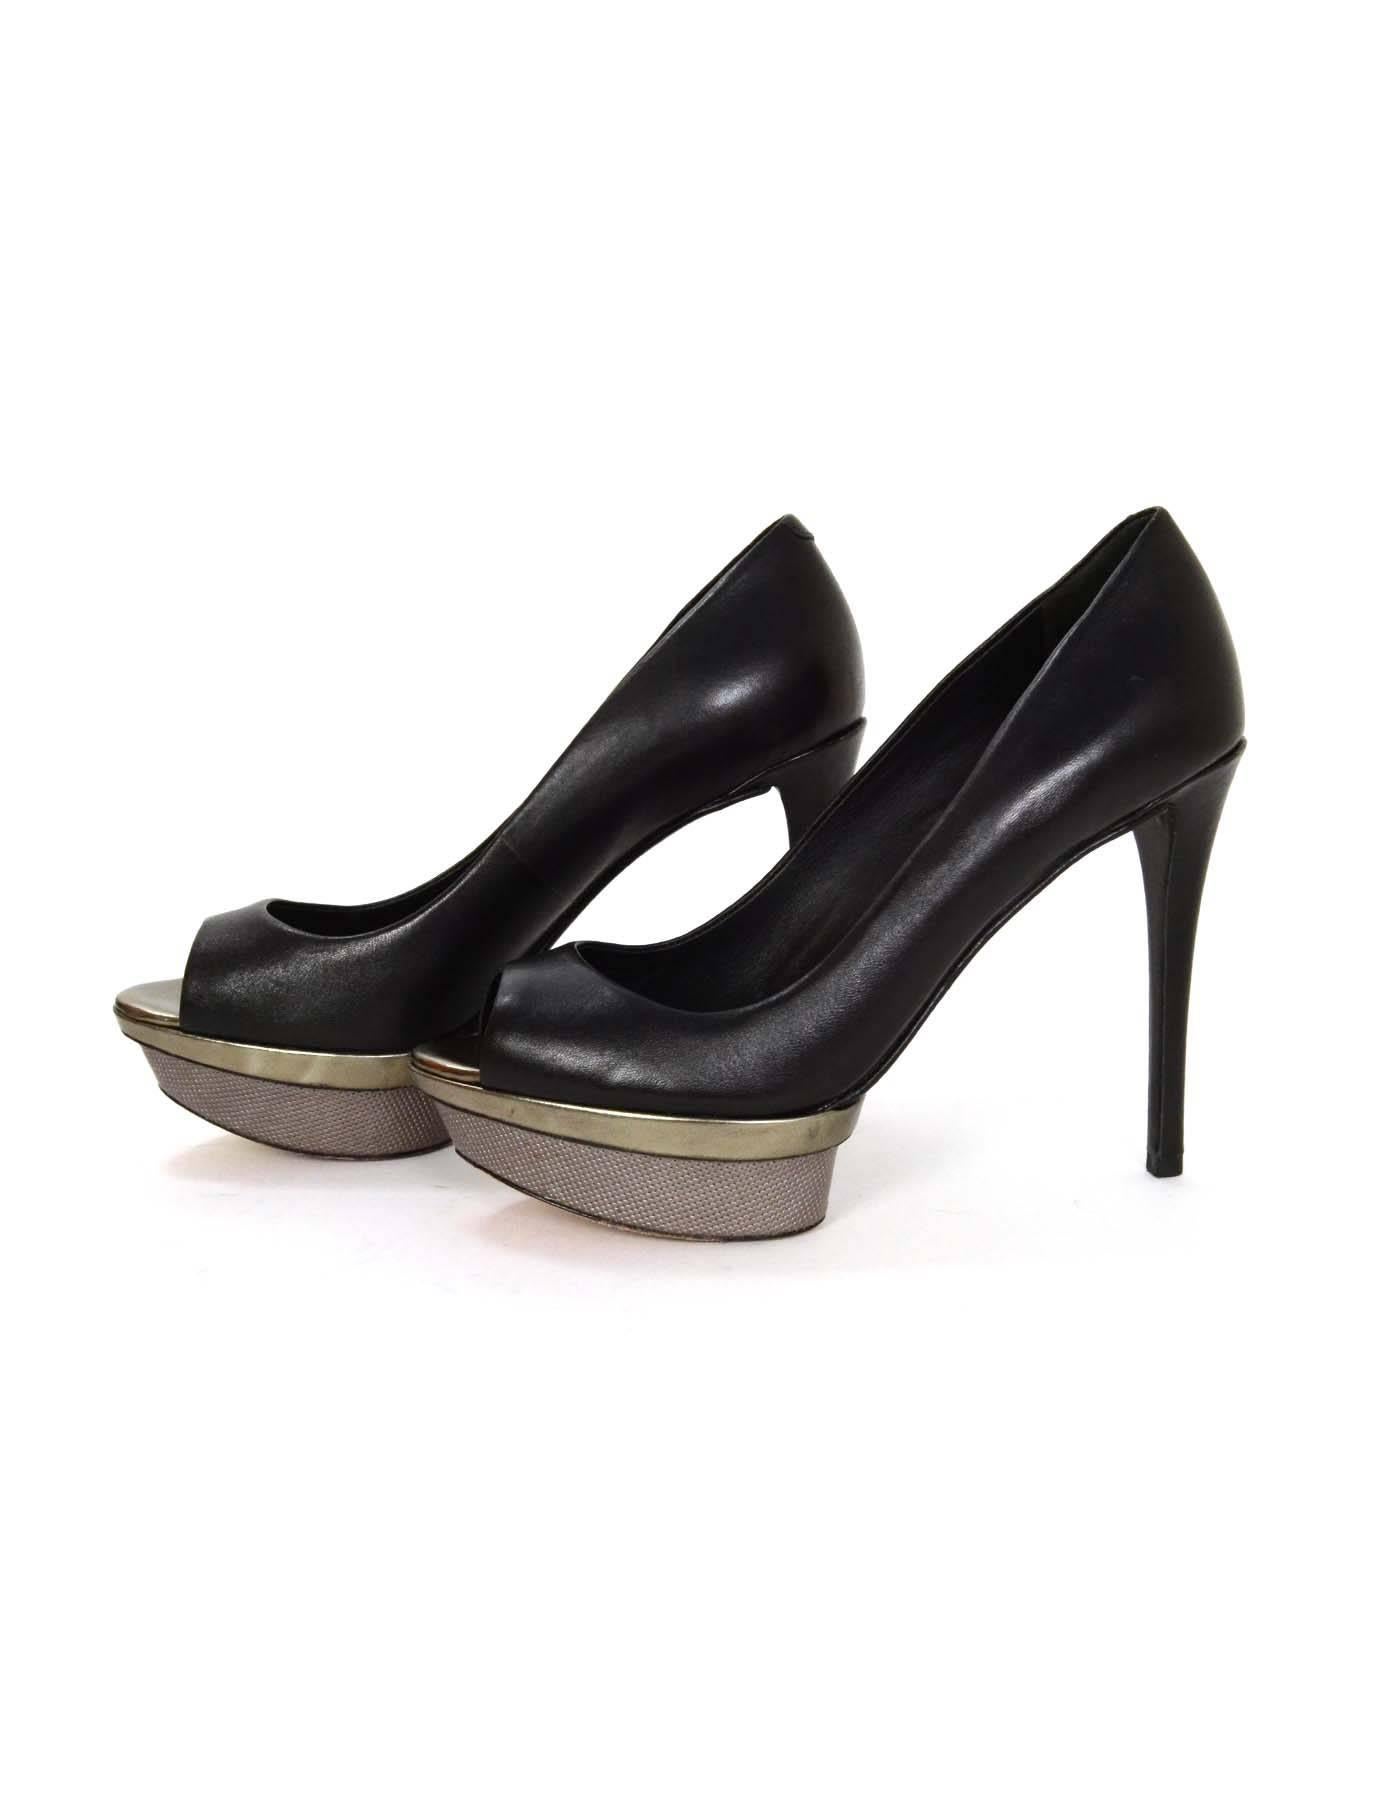 Brian Atwood Black Leather Peep-Toe Platform Pumps 
Features metallic textured platform
Made In: China
Color: Black and silver
Materials: Leather
Closure/Opening: Slide on
Sole Stamp: Brian Atwood Vero Cuoio 6
Overall Condition: Excellent